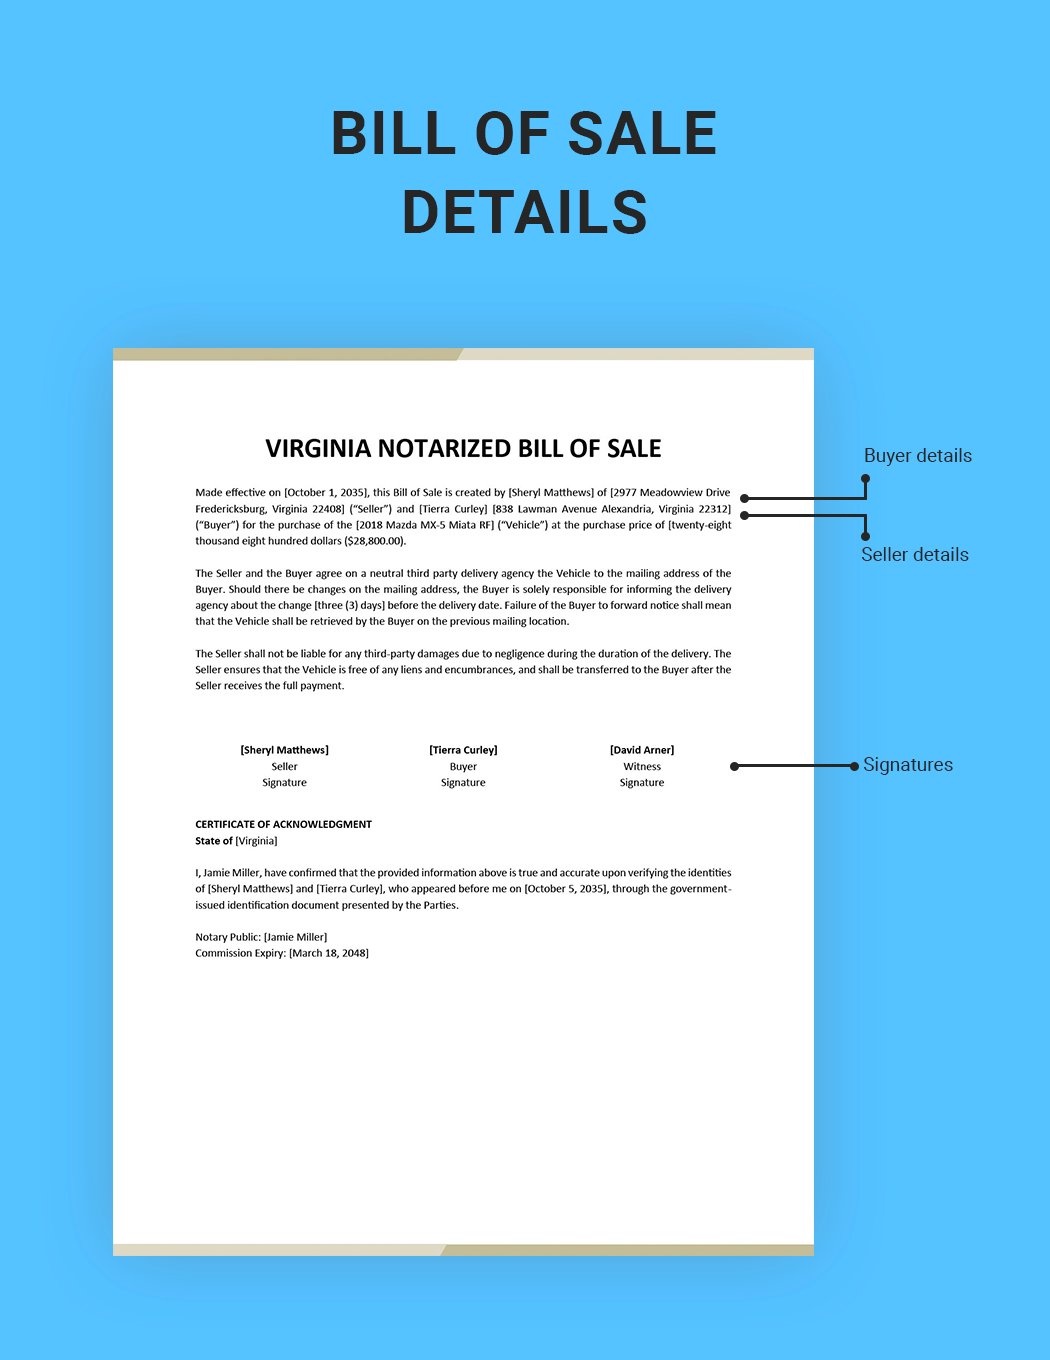 Virginia Notarized Bill of Sale Template